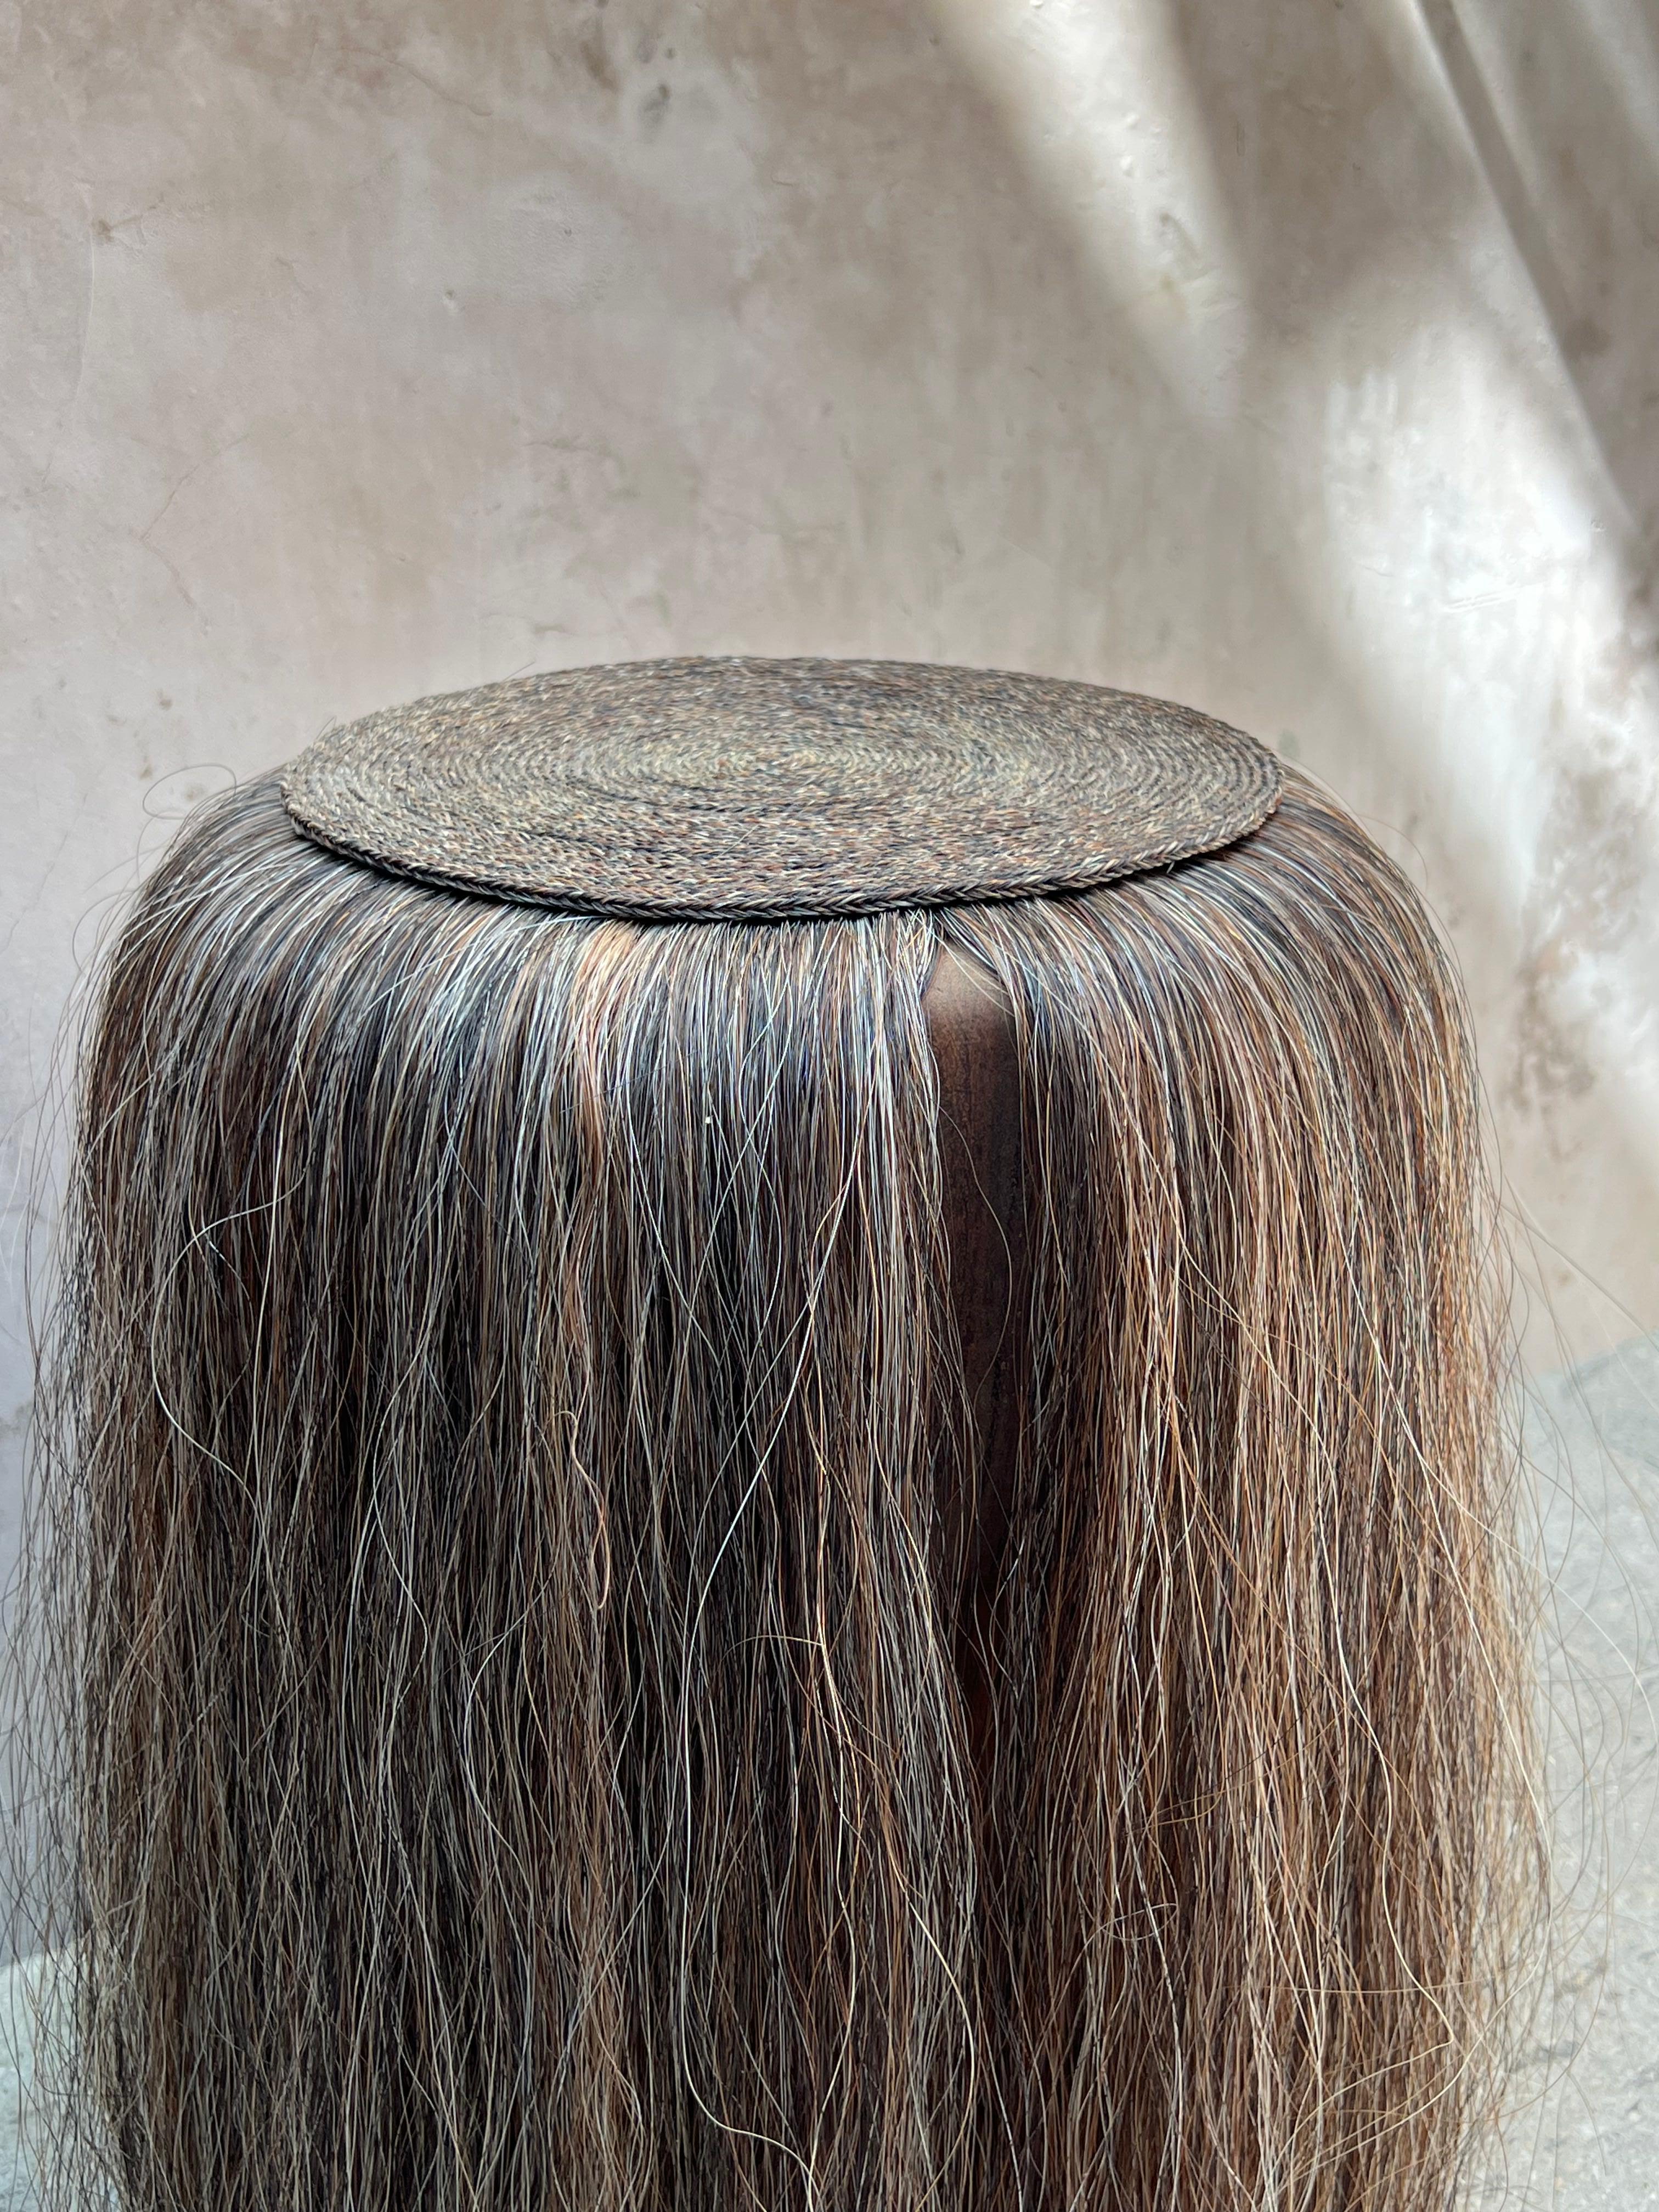 Mexican Cuaco Stool - Brown handwoven horsehair solid wood stool from Mexico. For Sale